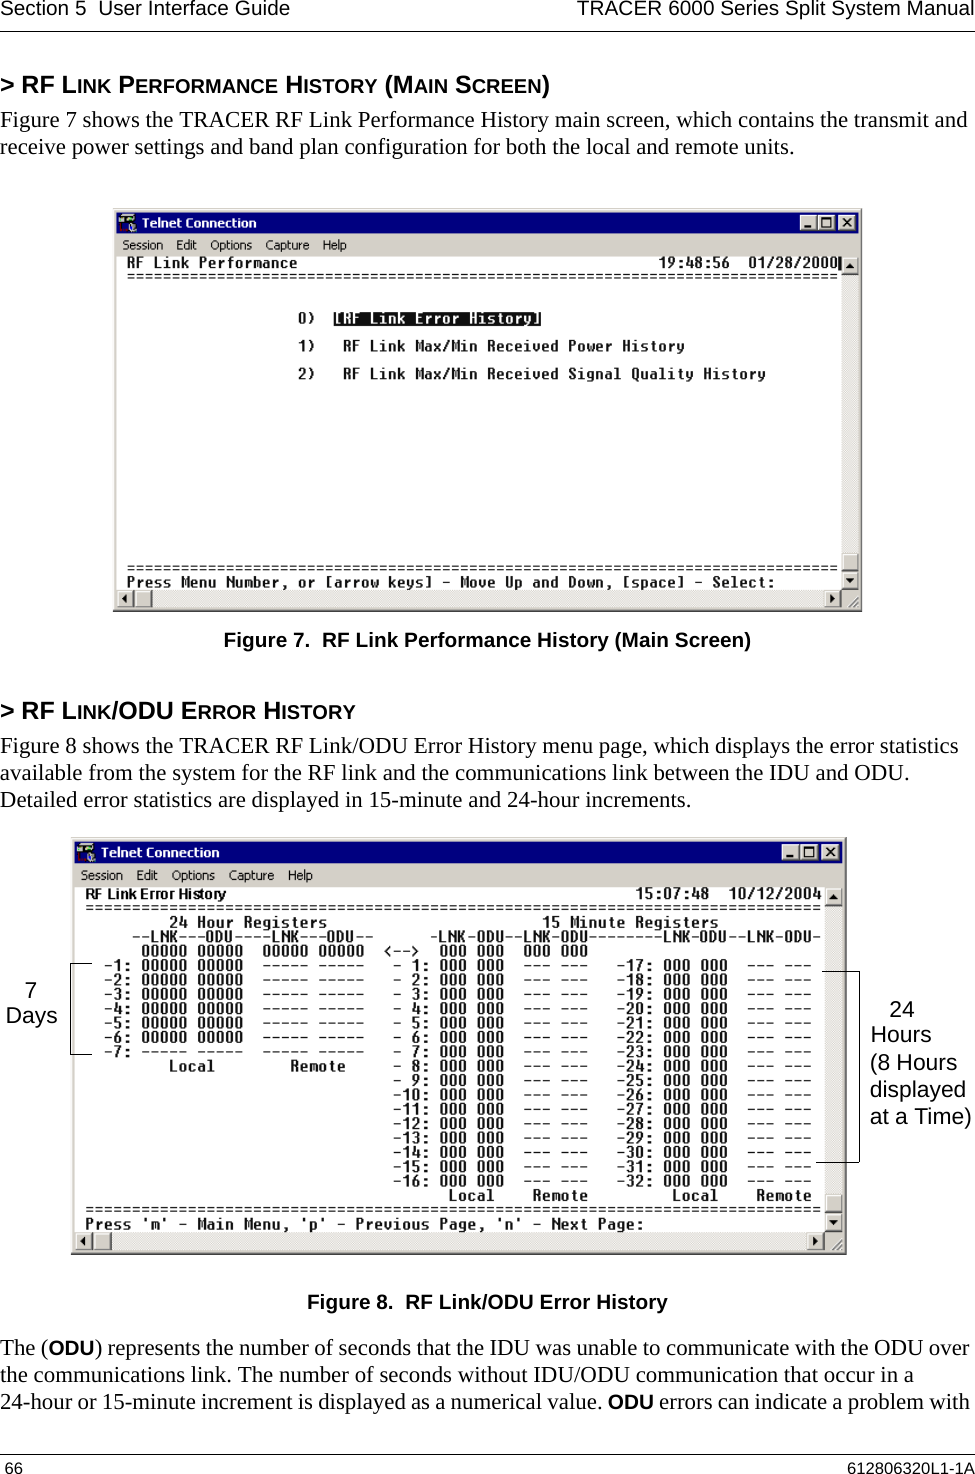 Section 5  User Interface Guide TRACER 6000 Series Split System Manual 66 612806320L1-1A&gt; RF LINK PERFORMANCE HISTORY (MAIN SCREEN)Figure 7 shows the TRACER RF Link Performance History main screen, which contains the transmit and receive power settings and band plan configuration for both the local and remote units.Figure 7.  RF Link Performance History (Main Screen)&gt; RF LINK/ODU ERROR HISTORYFigure 8 shows the TRACER RF Link/ODU Error History menu page, which displays the error statistics available from the system for the RF link and the communications link between the IDU and ODU. Detailed error statistics are displayed in 15-minute and 24-hour increments. Figure 8.  RF Link/ODU Error HistoryThe (ODU) represents the number of seconds that the IDU was unable to communicate with the ODU over the communications link. The number of seconds without IDU/ODU communication that occur in a 24-hour or 15-minute increment is displayed as a numerical value. ODU errors can indicate a problem with 7Days 24Hours(8 Hours displayed at a Time)